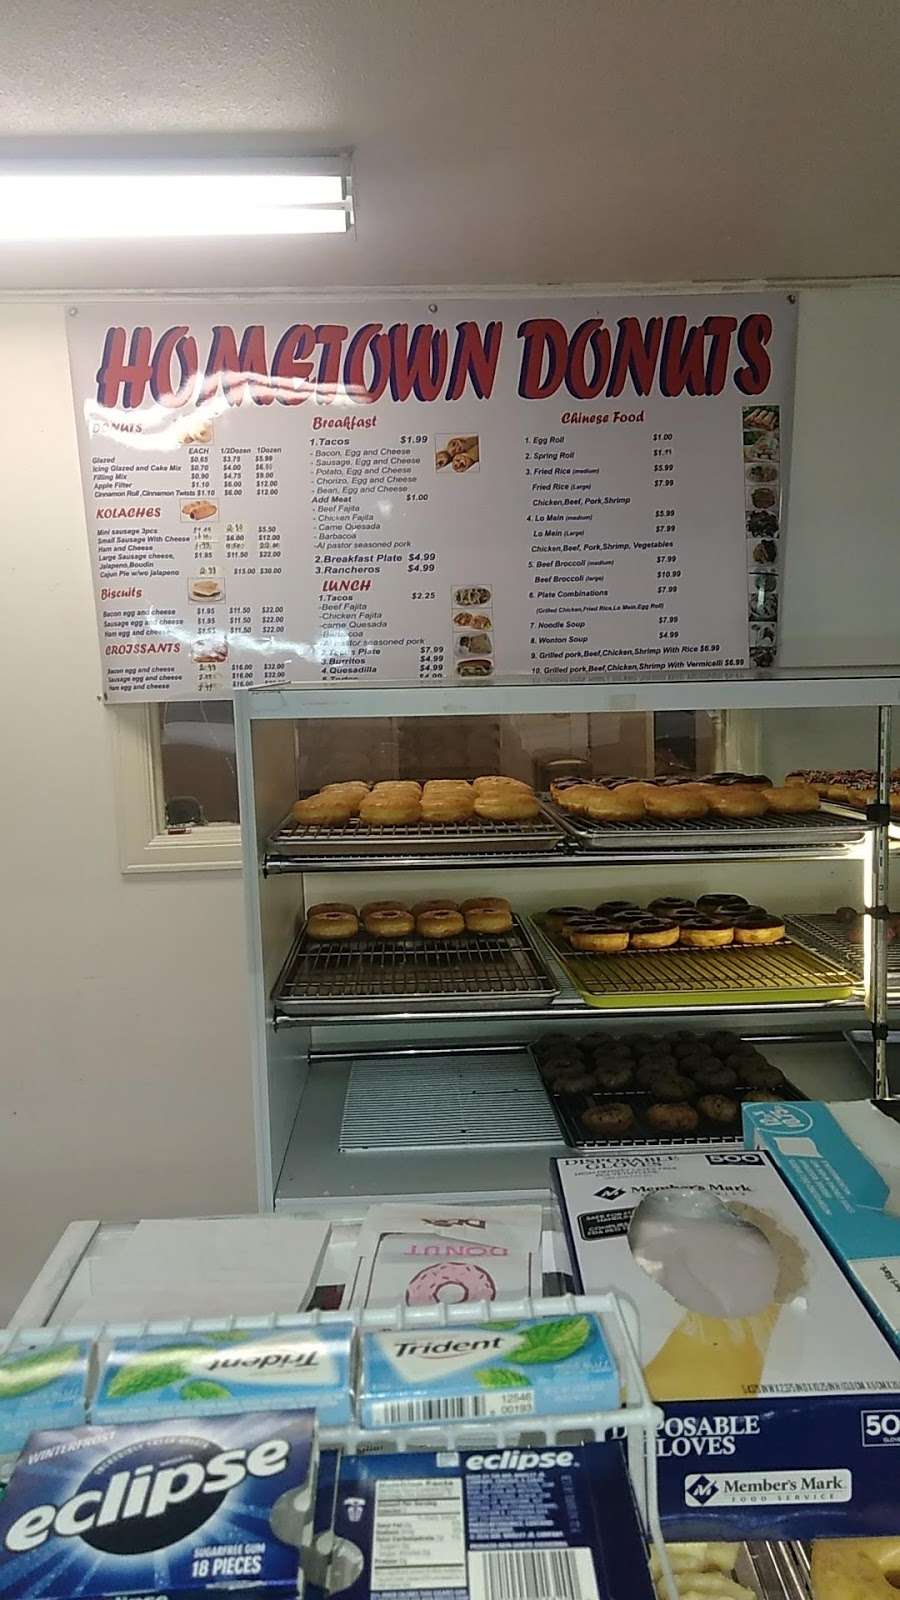 Hometown Donuts | 12728, FM1409, Old River-Winfree, TX 77535, USA | Phone: (281) 576-6122